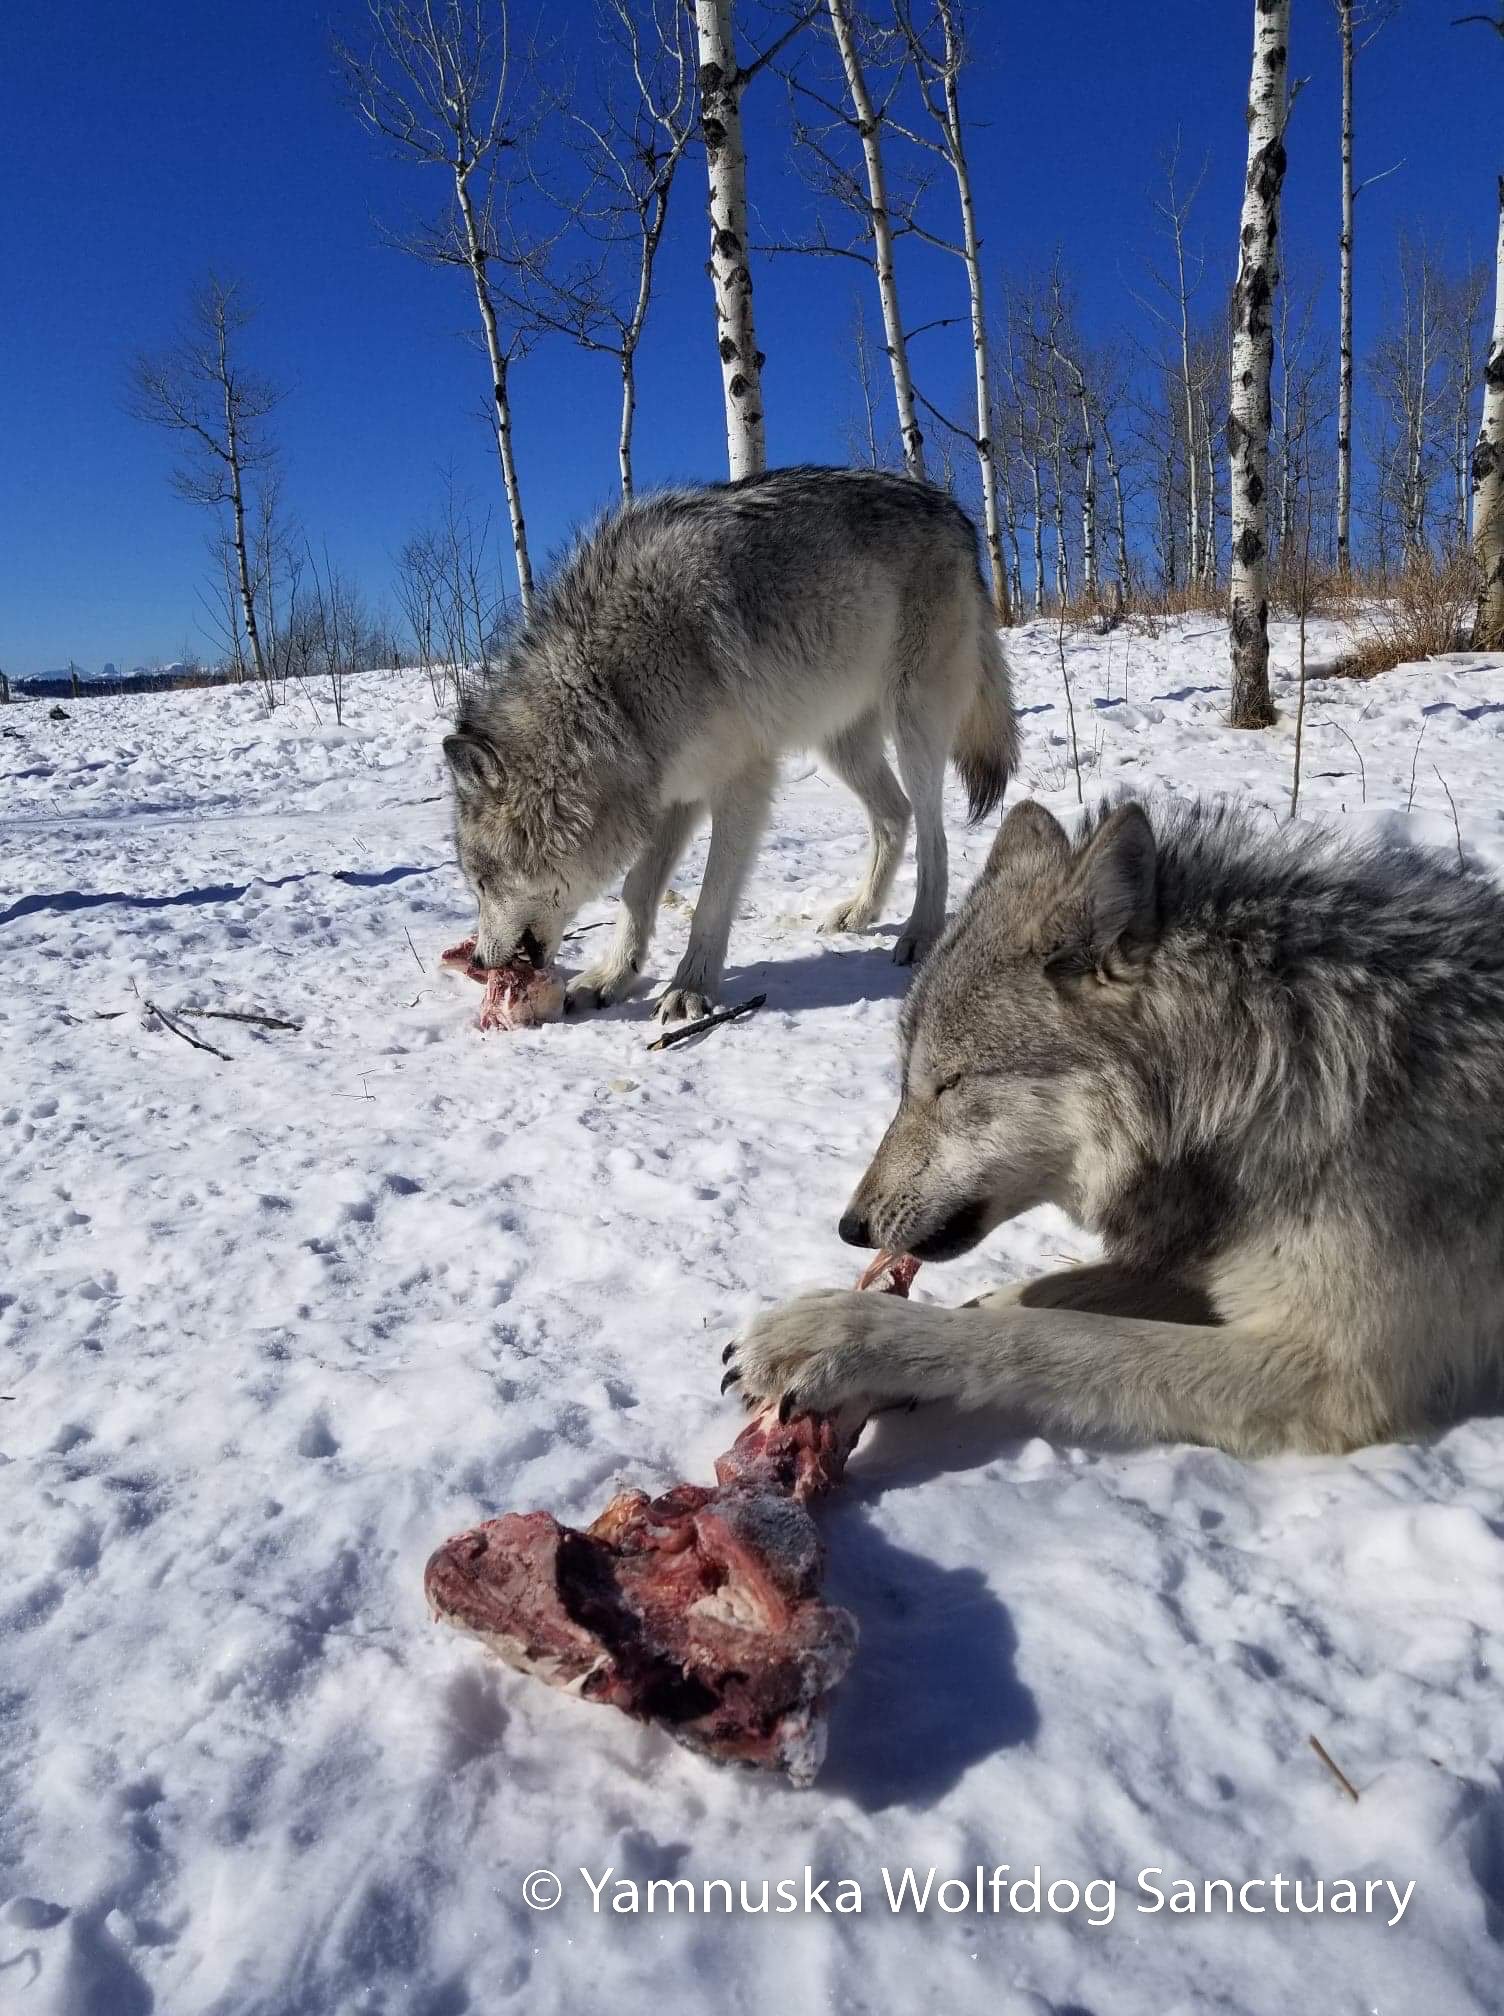 Large, meaty bones can provide hours of entertainment for the wolfdogs